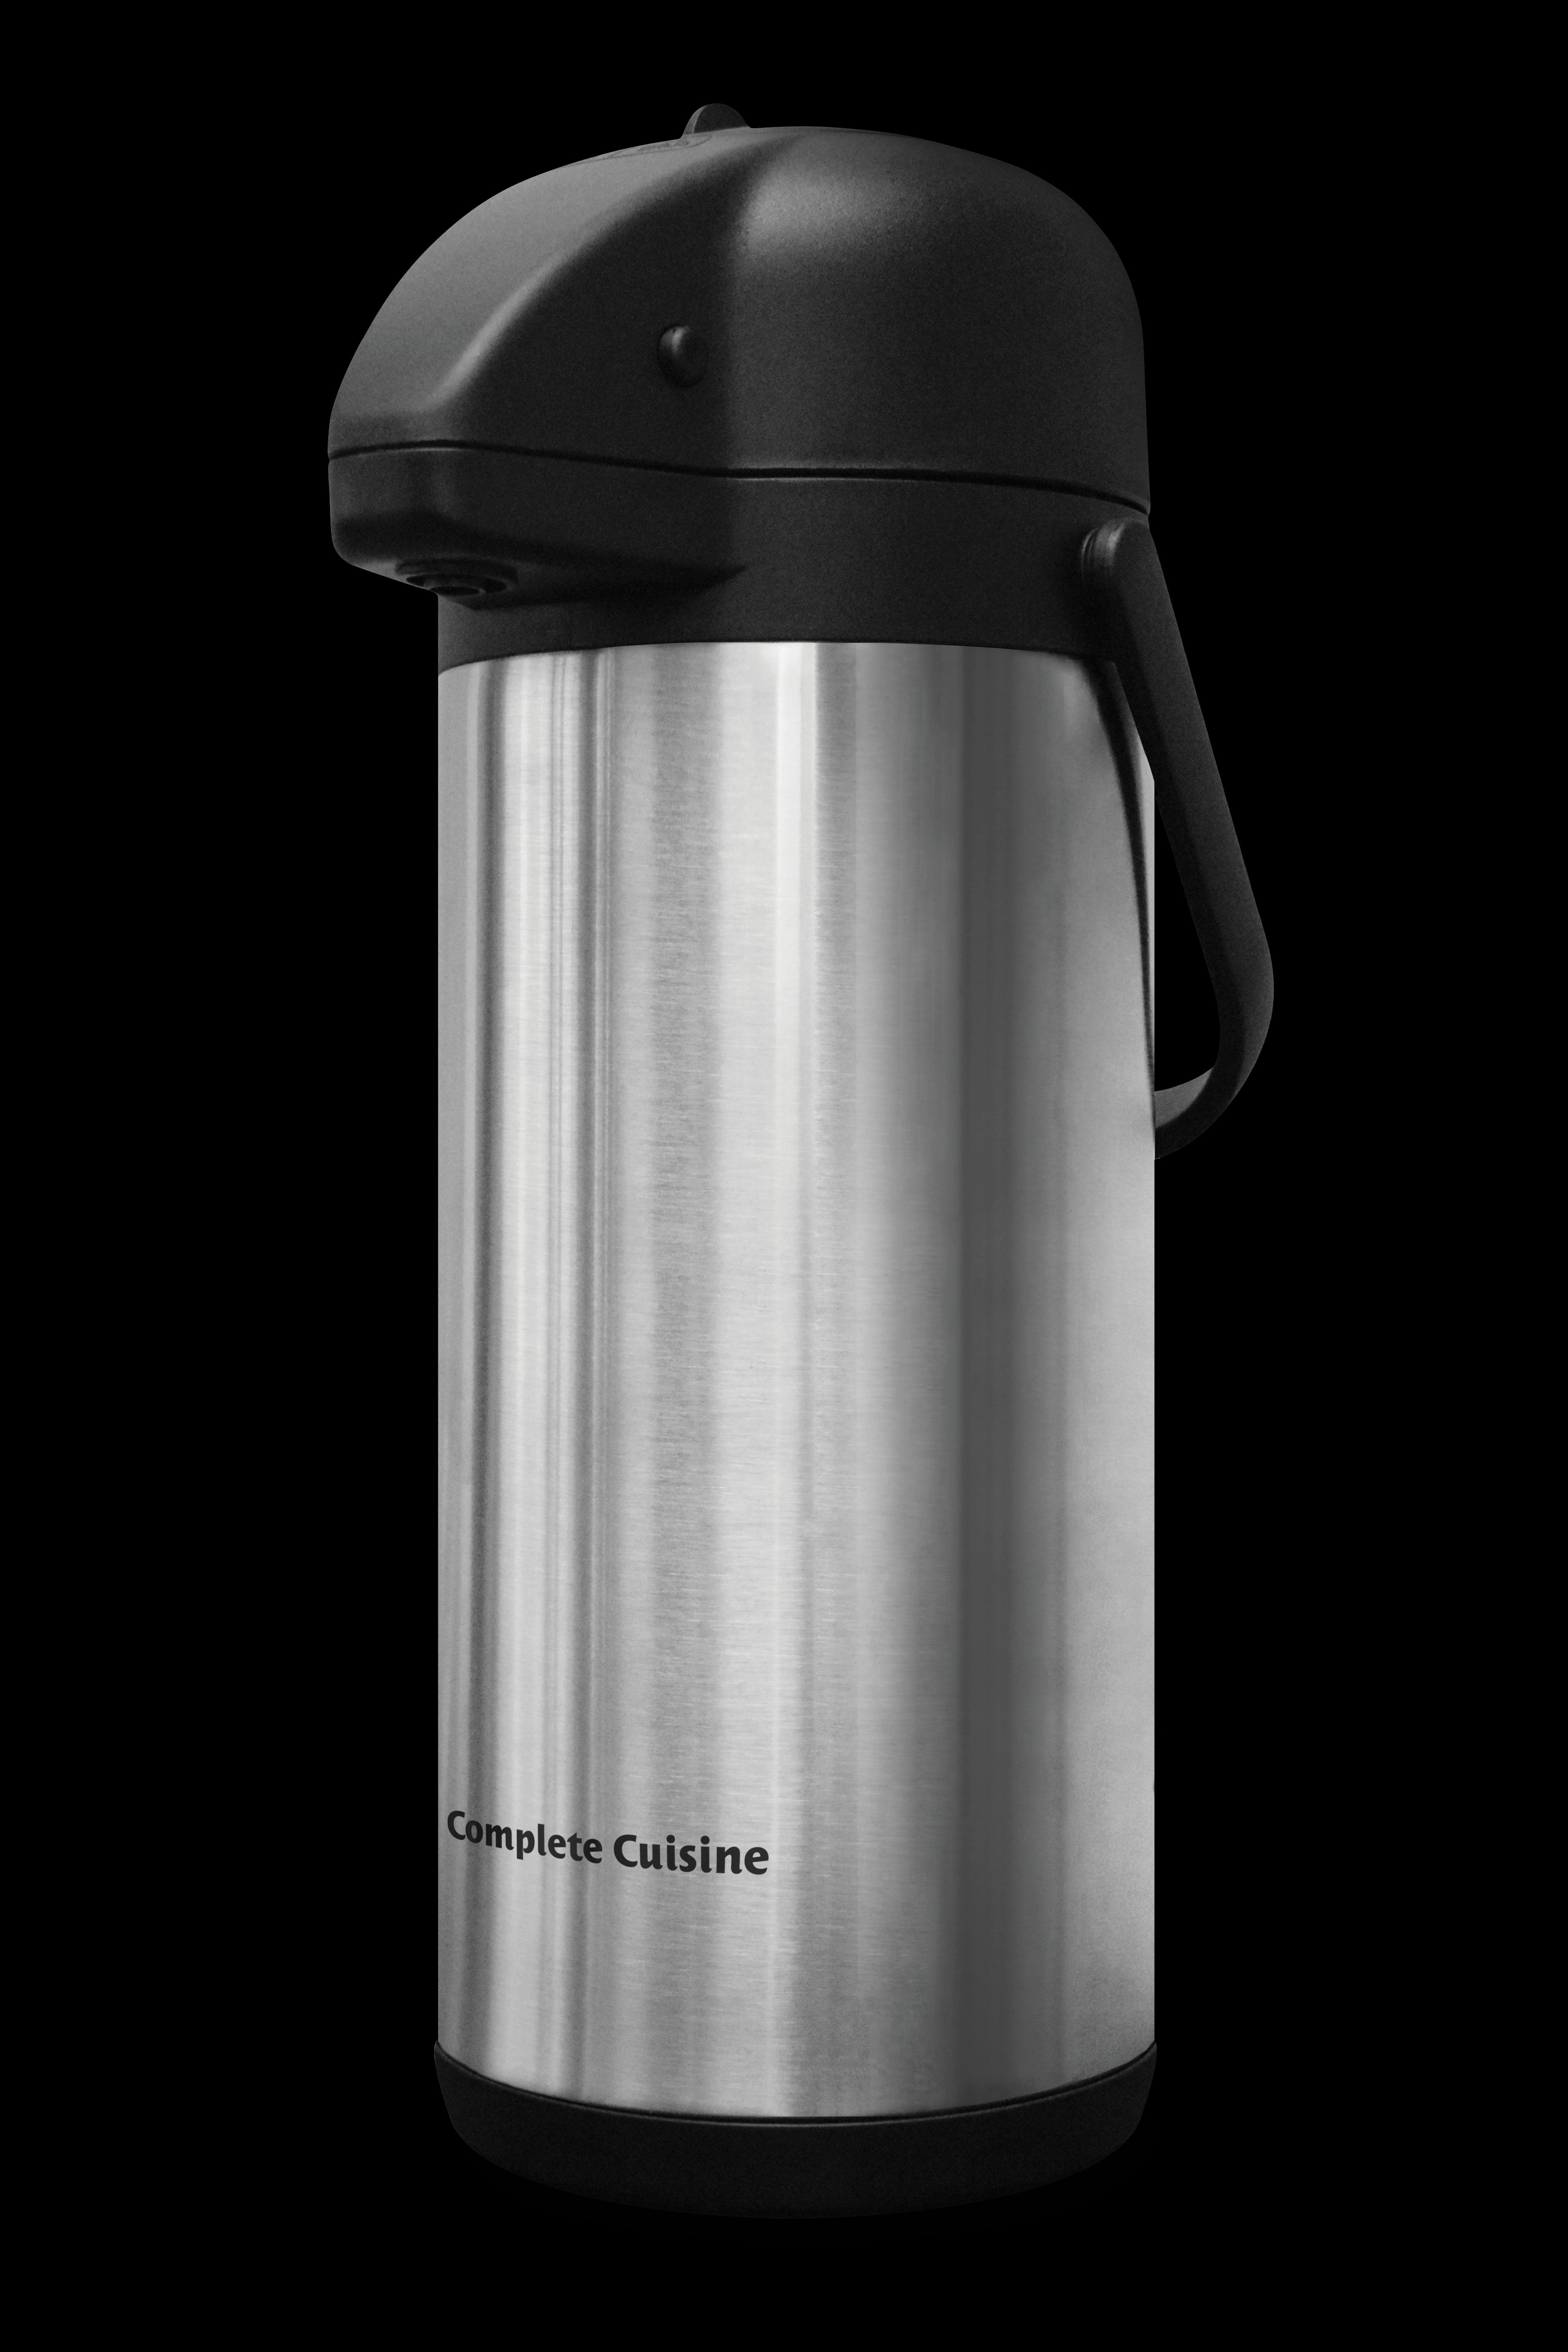 Carafe Thermal 3L Stainless Steel, Hot Water Dispenser for Coffee and Tea, 12 Hour Heat 24 Hour Cold Retention